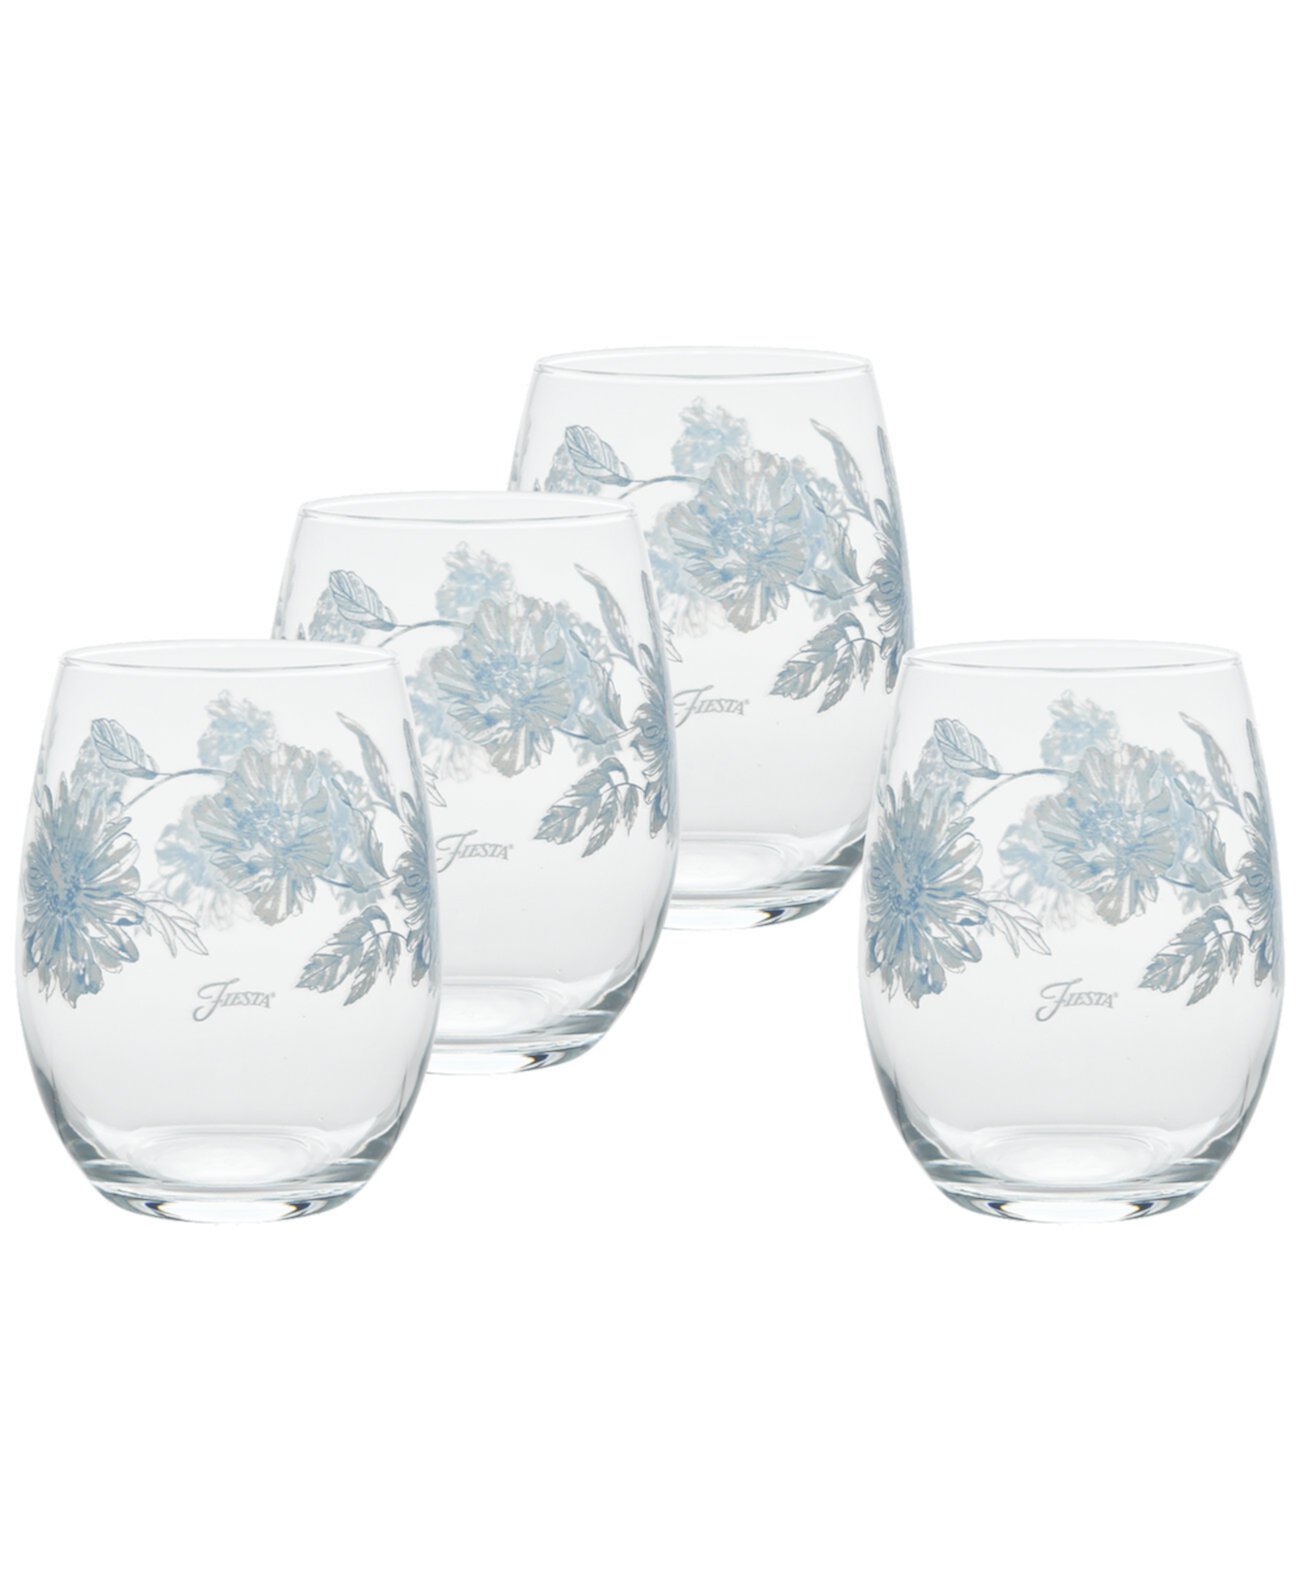 Botanical Floral 15-Ounce Stemless Wine Glass Set of 4 FIESTA